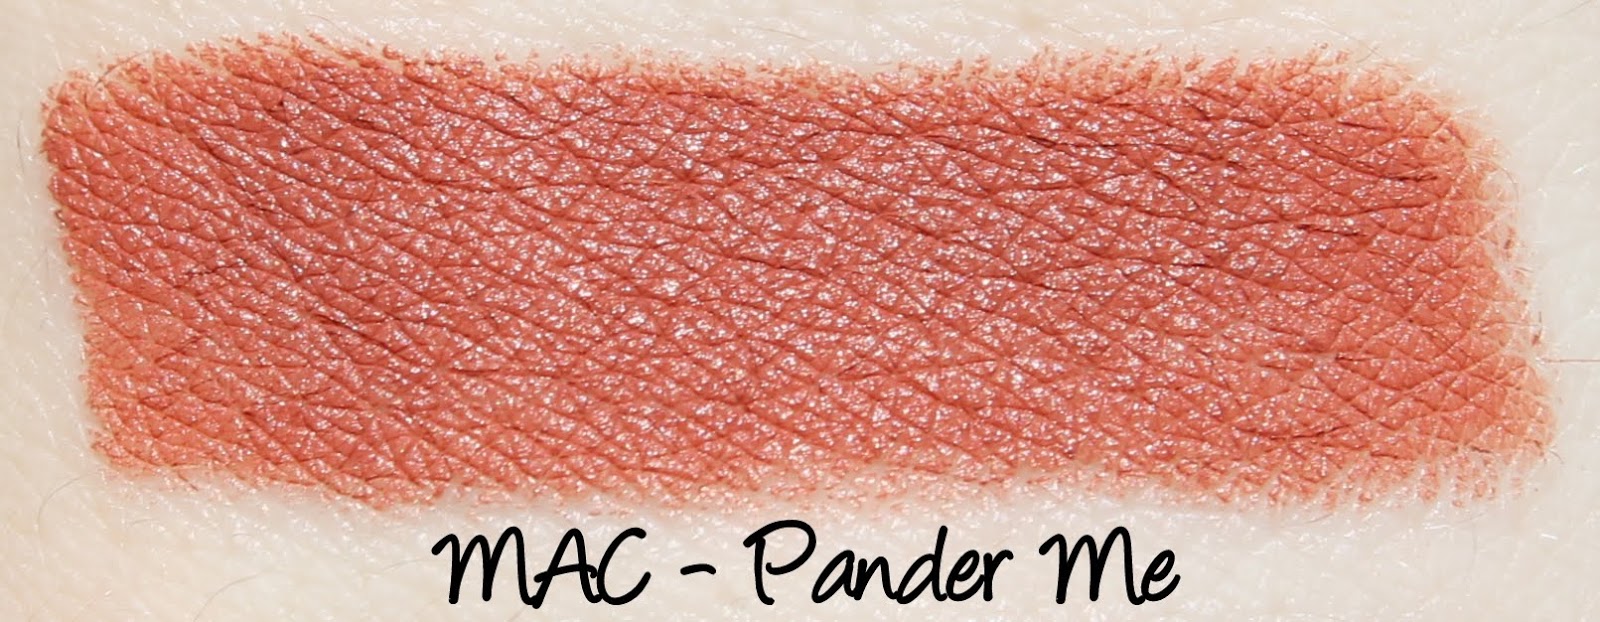 MAC Pander Me Lipstick Swatches & Review